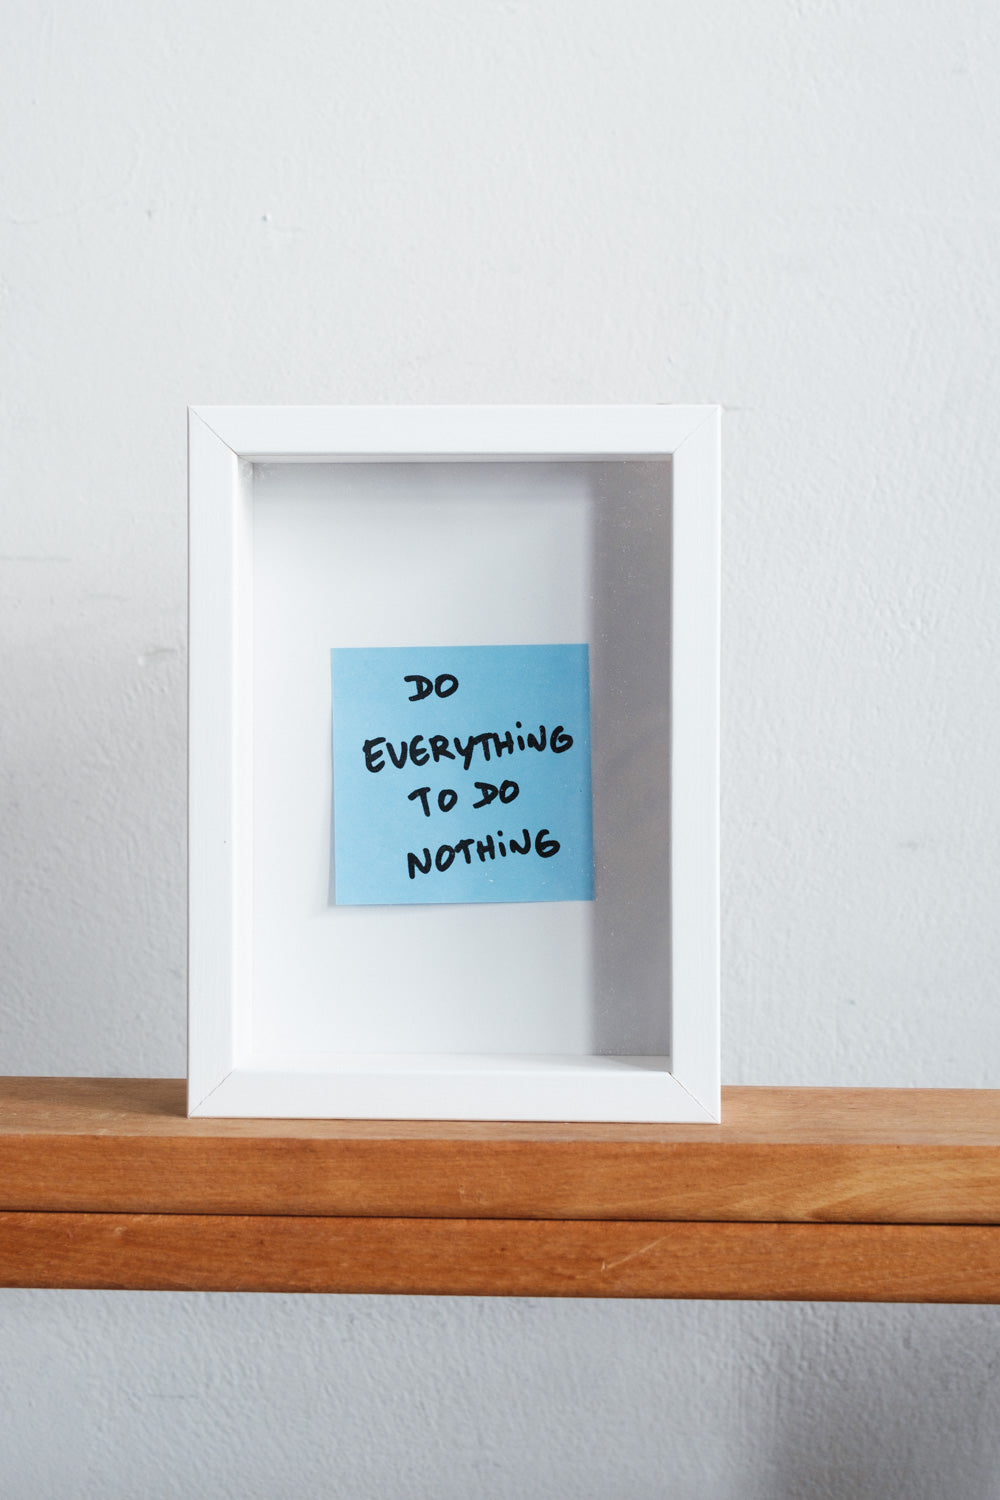 Art: Silkprint on Post-it® : DO EVERYTHING TO DO NOTHING (BLUE)